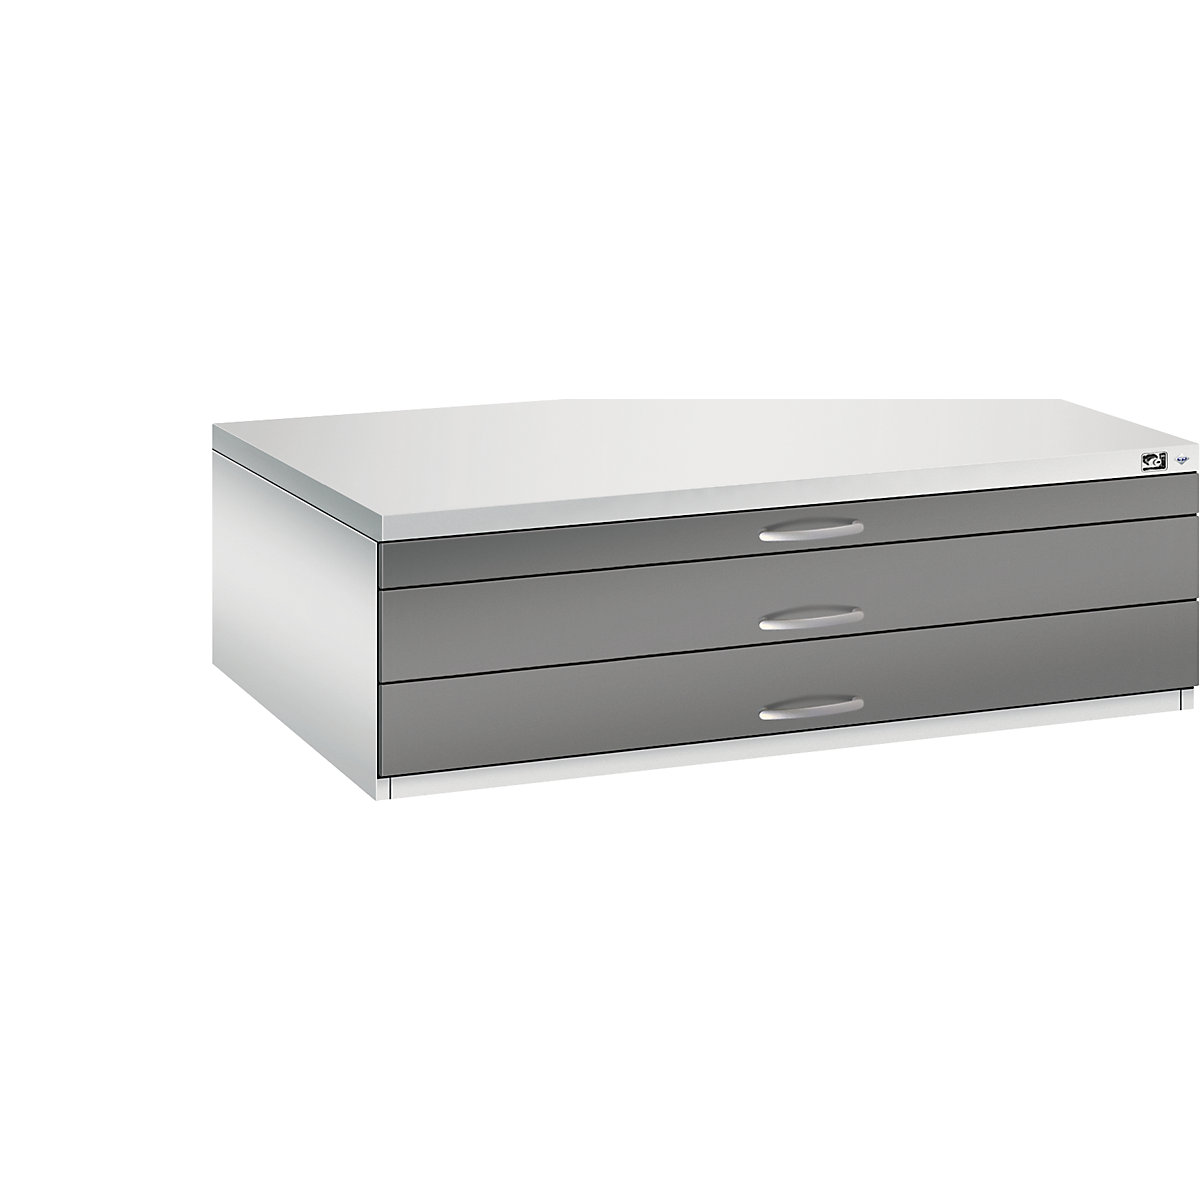 Drawing cabinet – C+P, A0, 3 drawers, height 420 mm, light grey / volcanic grey-13